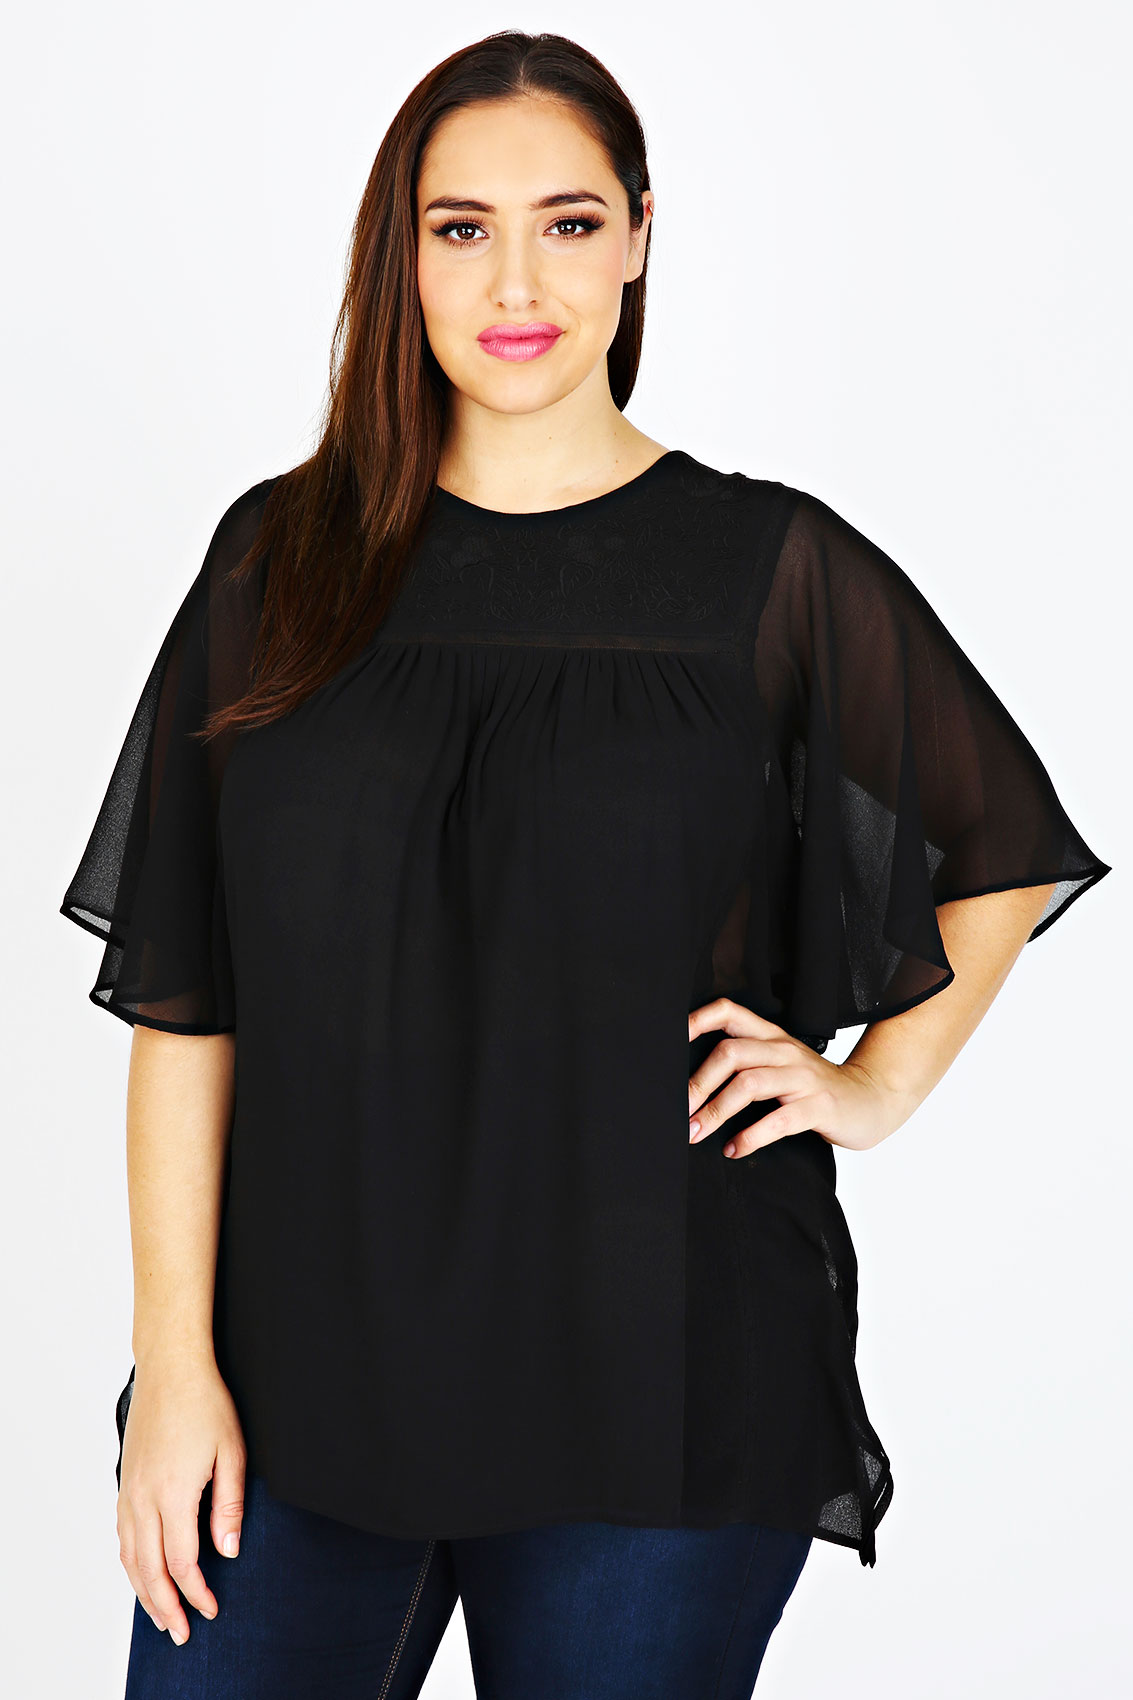 Black Angle Sleeve Embroidered Blouse Plus size 16,18,20,22,24,26,28,30,32